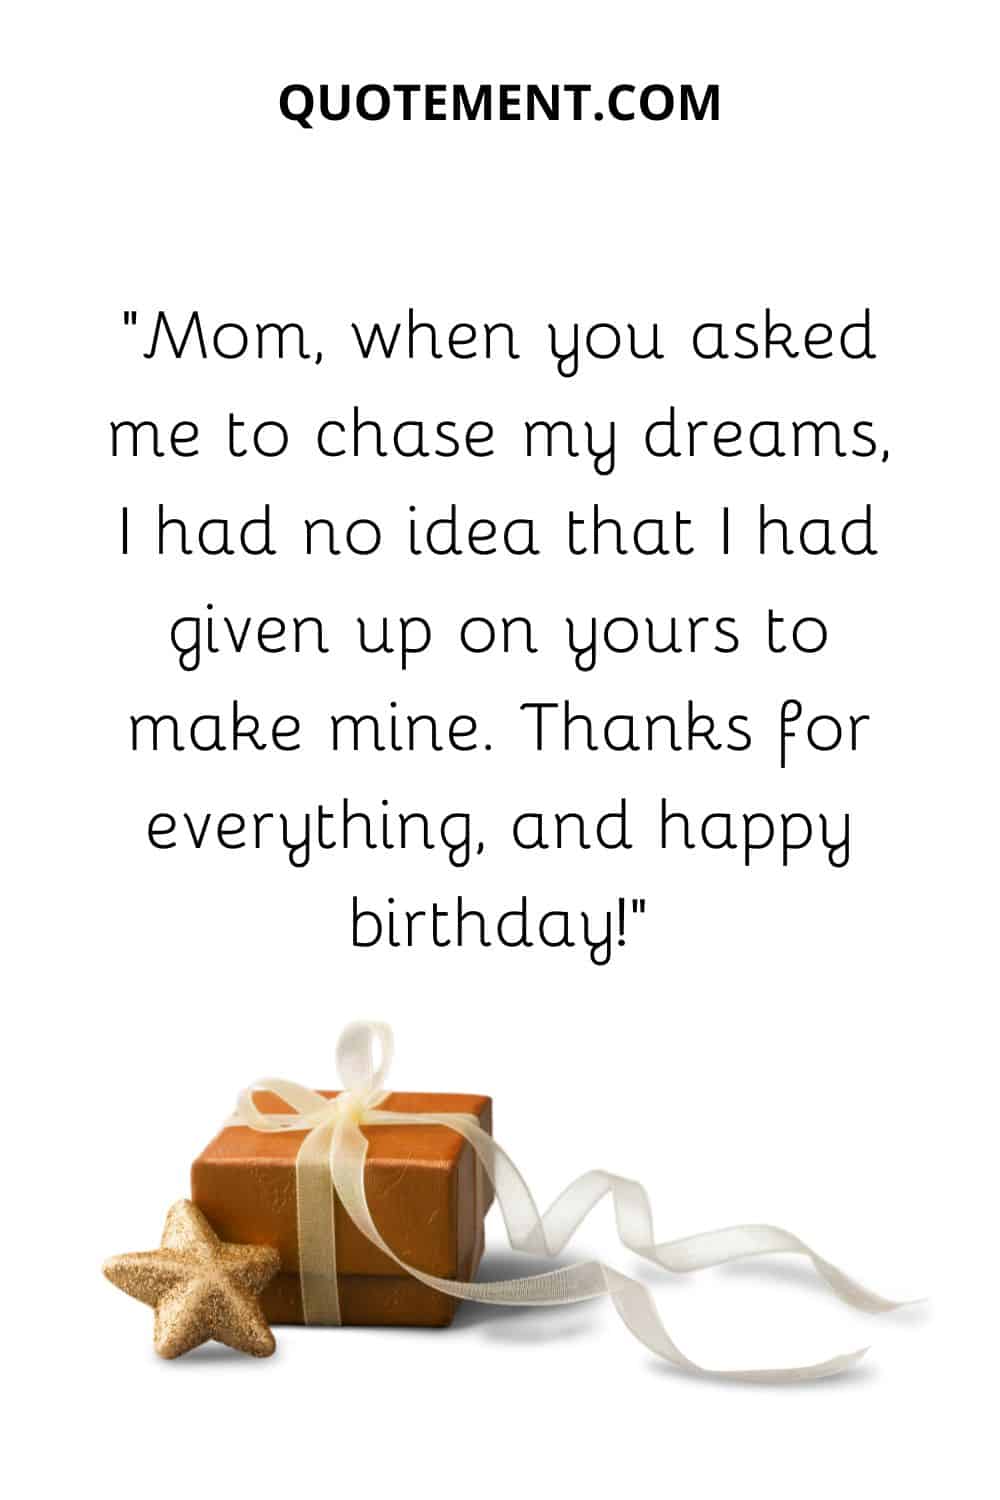 Mom, when you asked me to chase my dreams, I had no idea that I had given up on yours to make mine